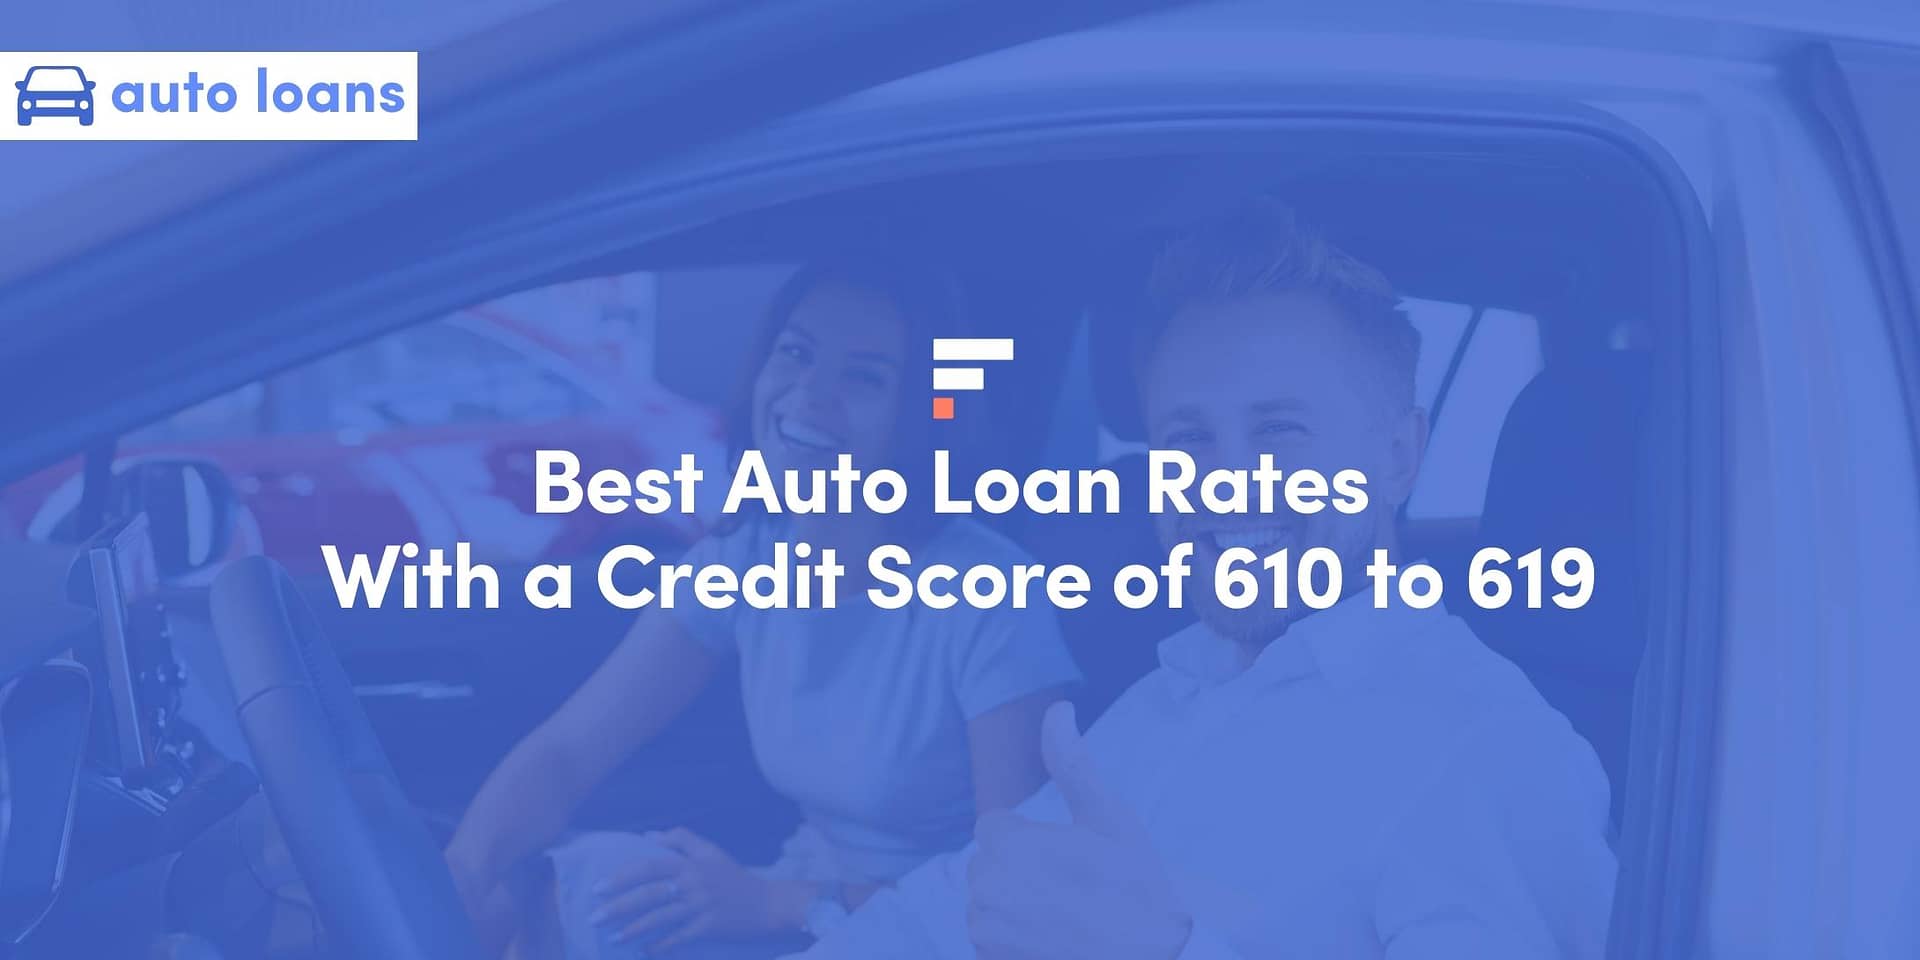 Best Auto Loan Rates With a Credit Score of 610 to 619